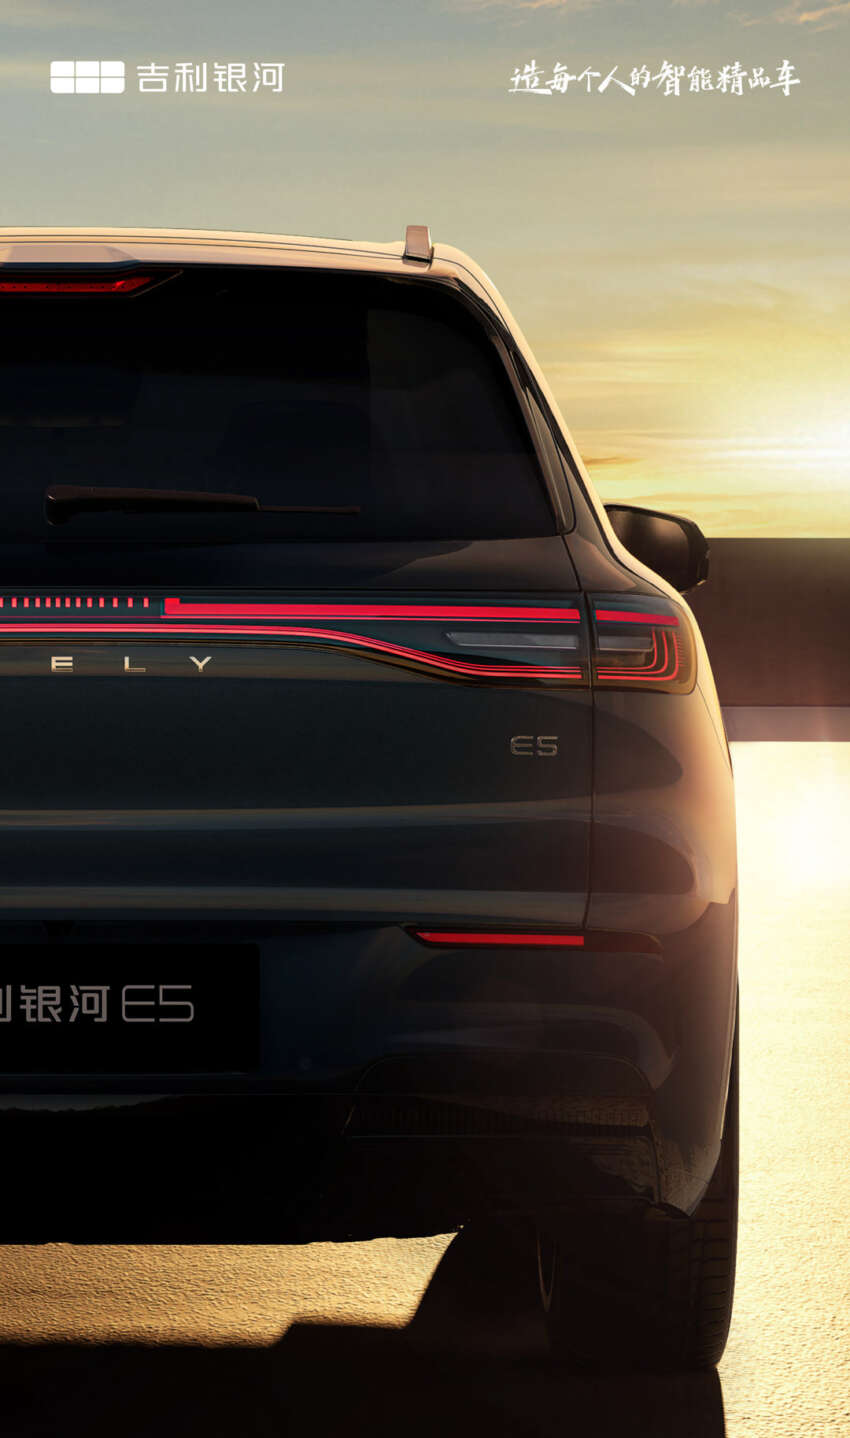 Geely Galaxy E5 revealed in China – new EV built on GEA; previews Proton’s upcoming EV in 2025? 1760752